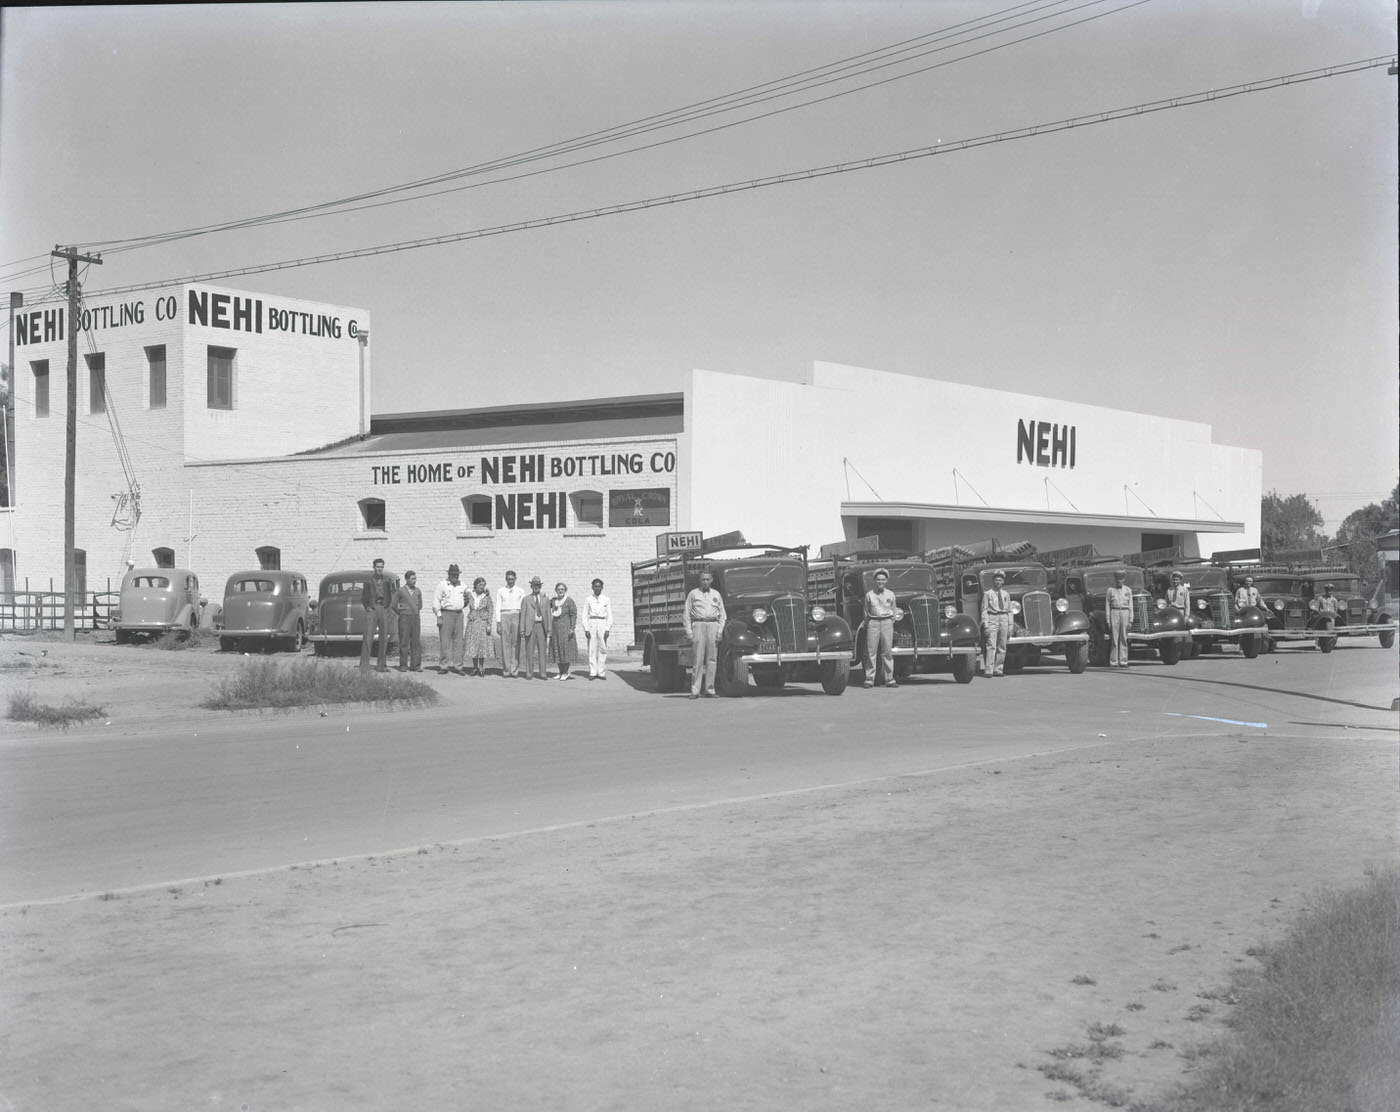 Employees in Front of Nehi Bottling Co. Building, 1930s